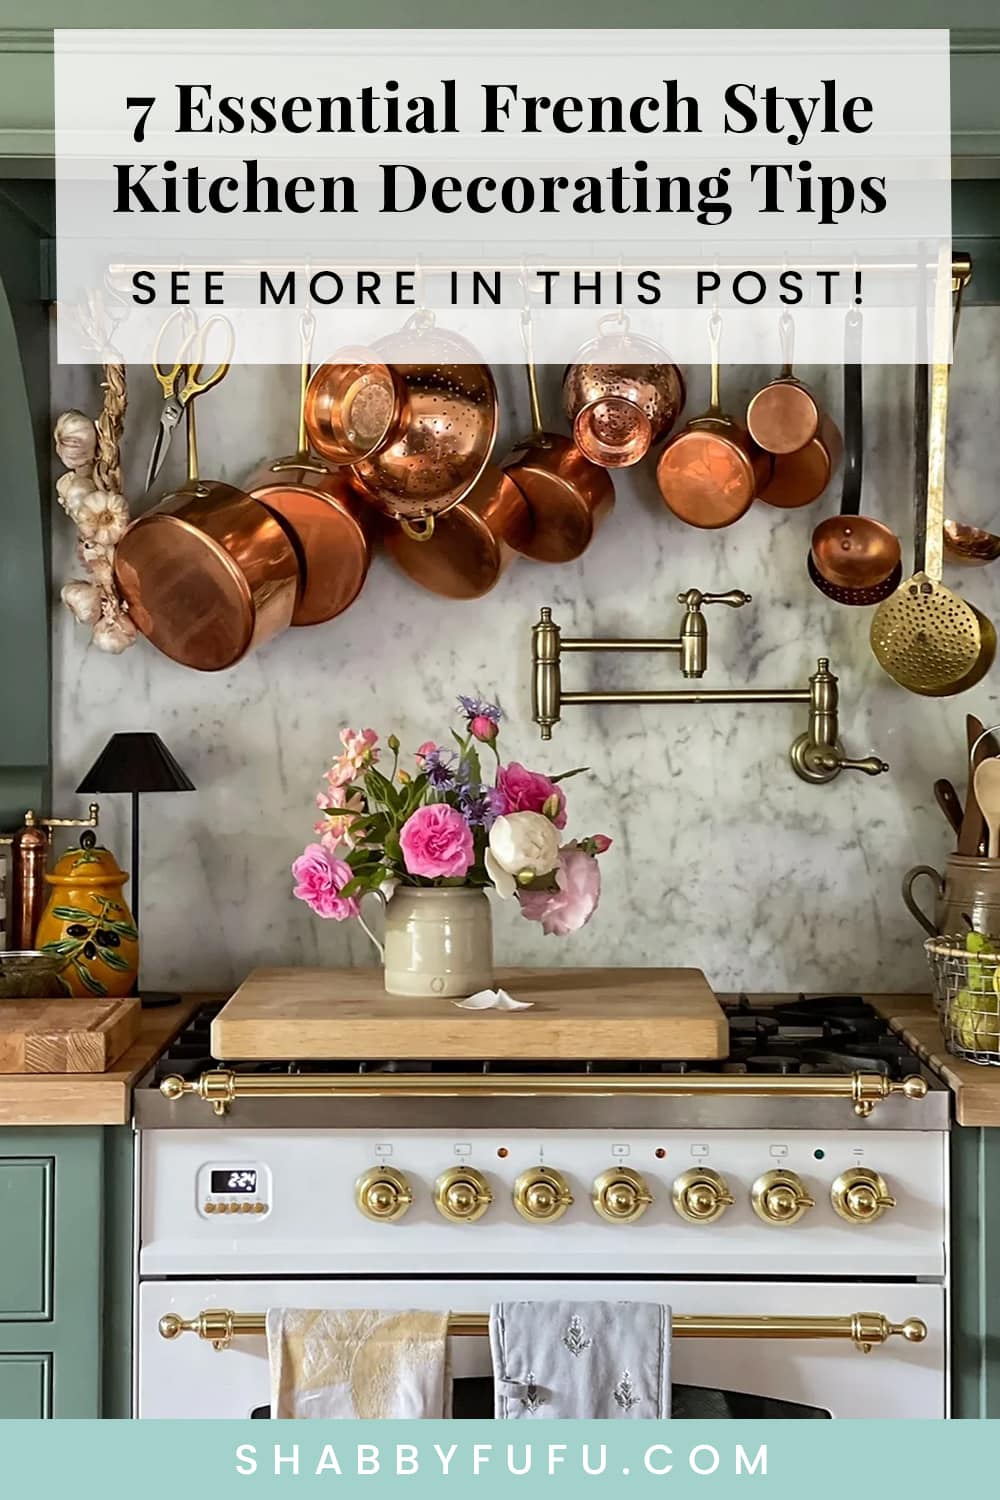 How to Build a French-Style Kitchen: Appliances, Decor, and Recipes